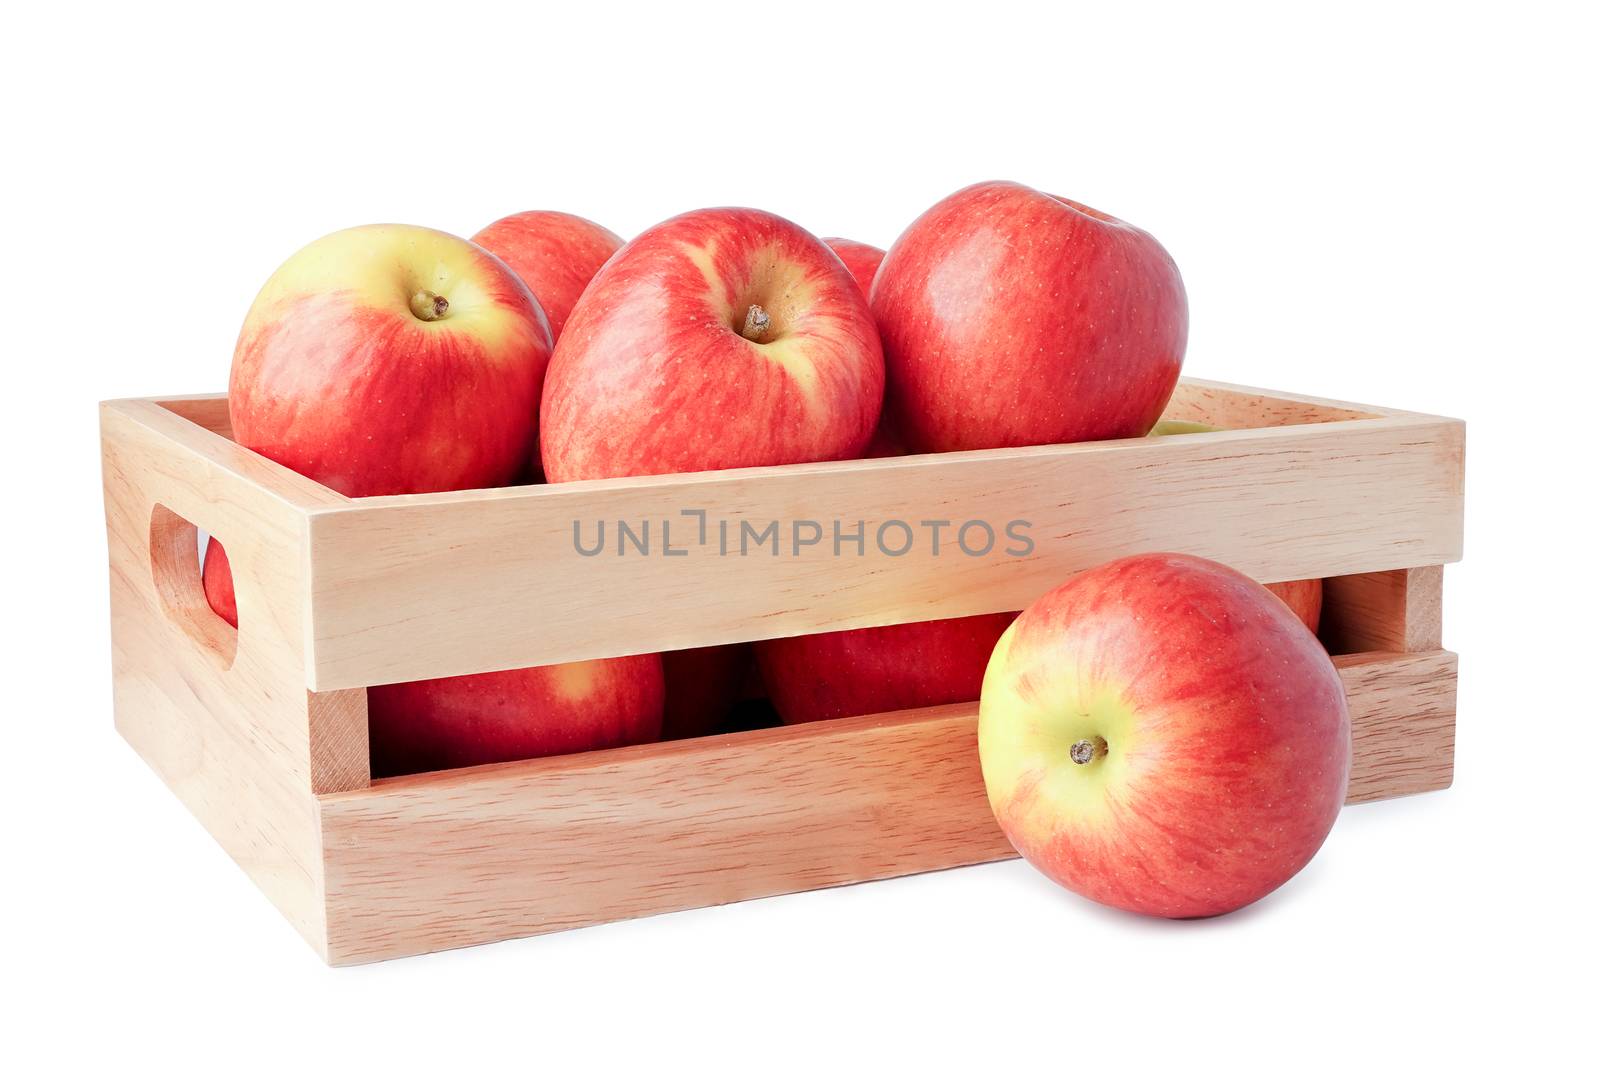 Apple fruit in wooden box isolate on white background with clipping path. by pamai